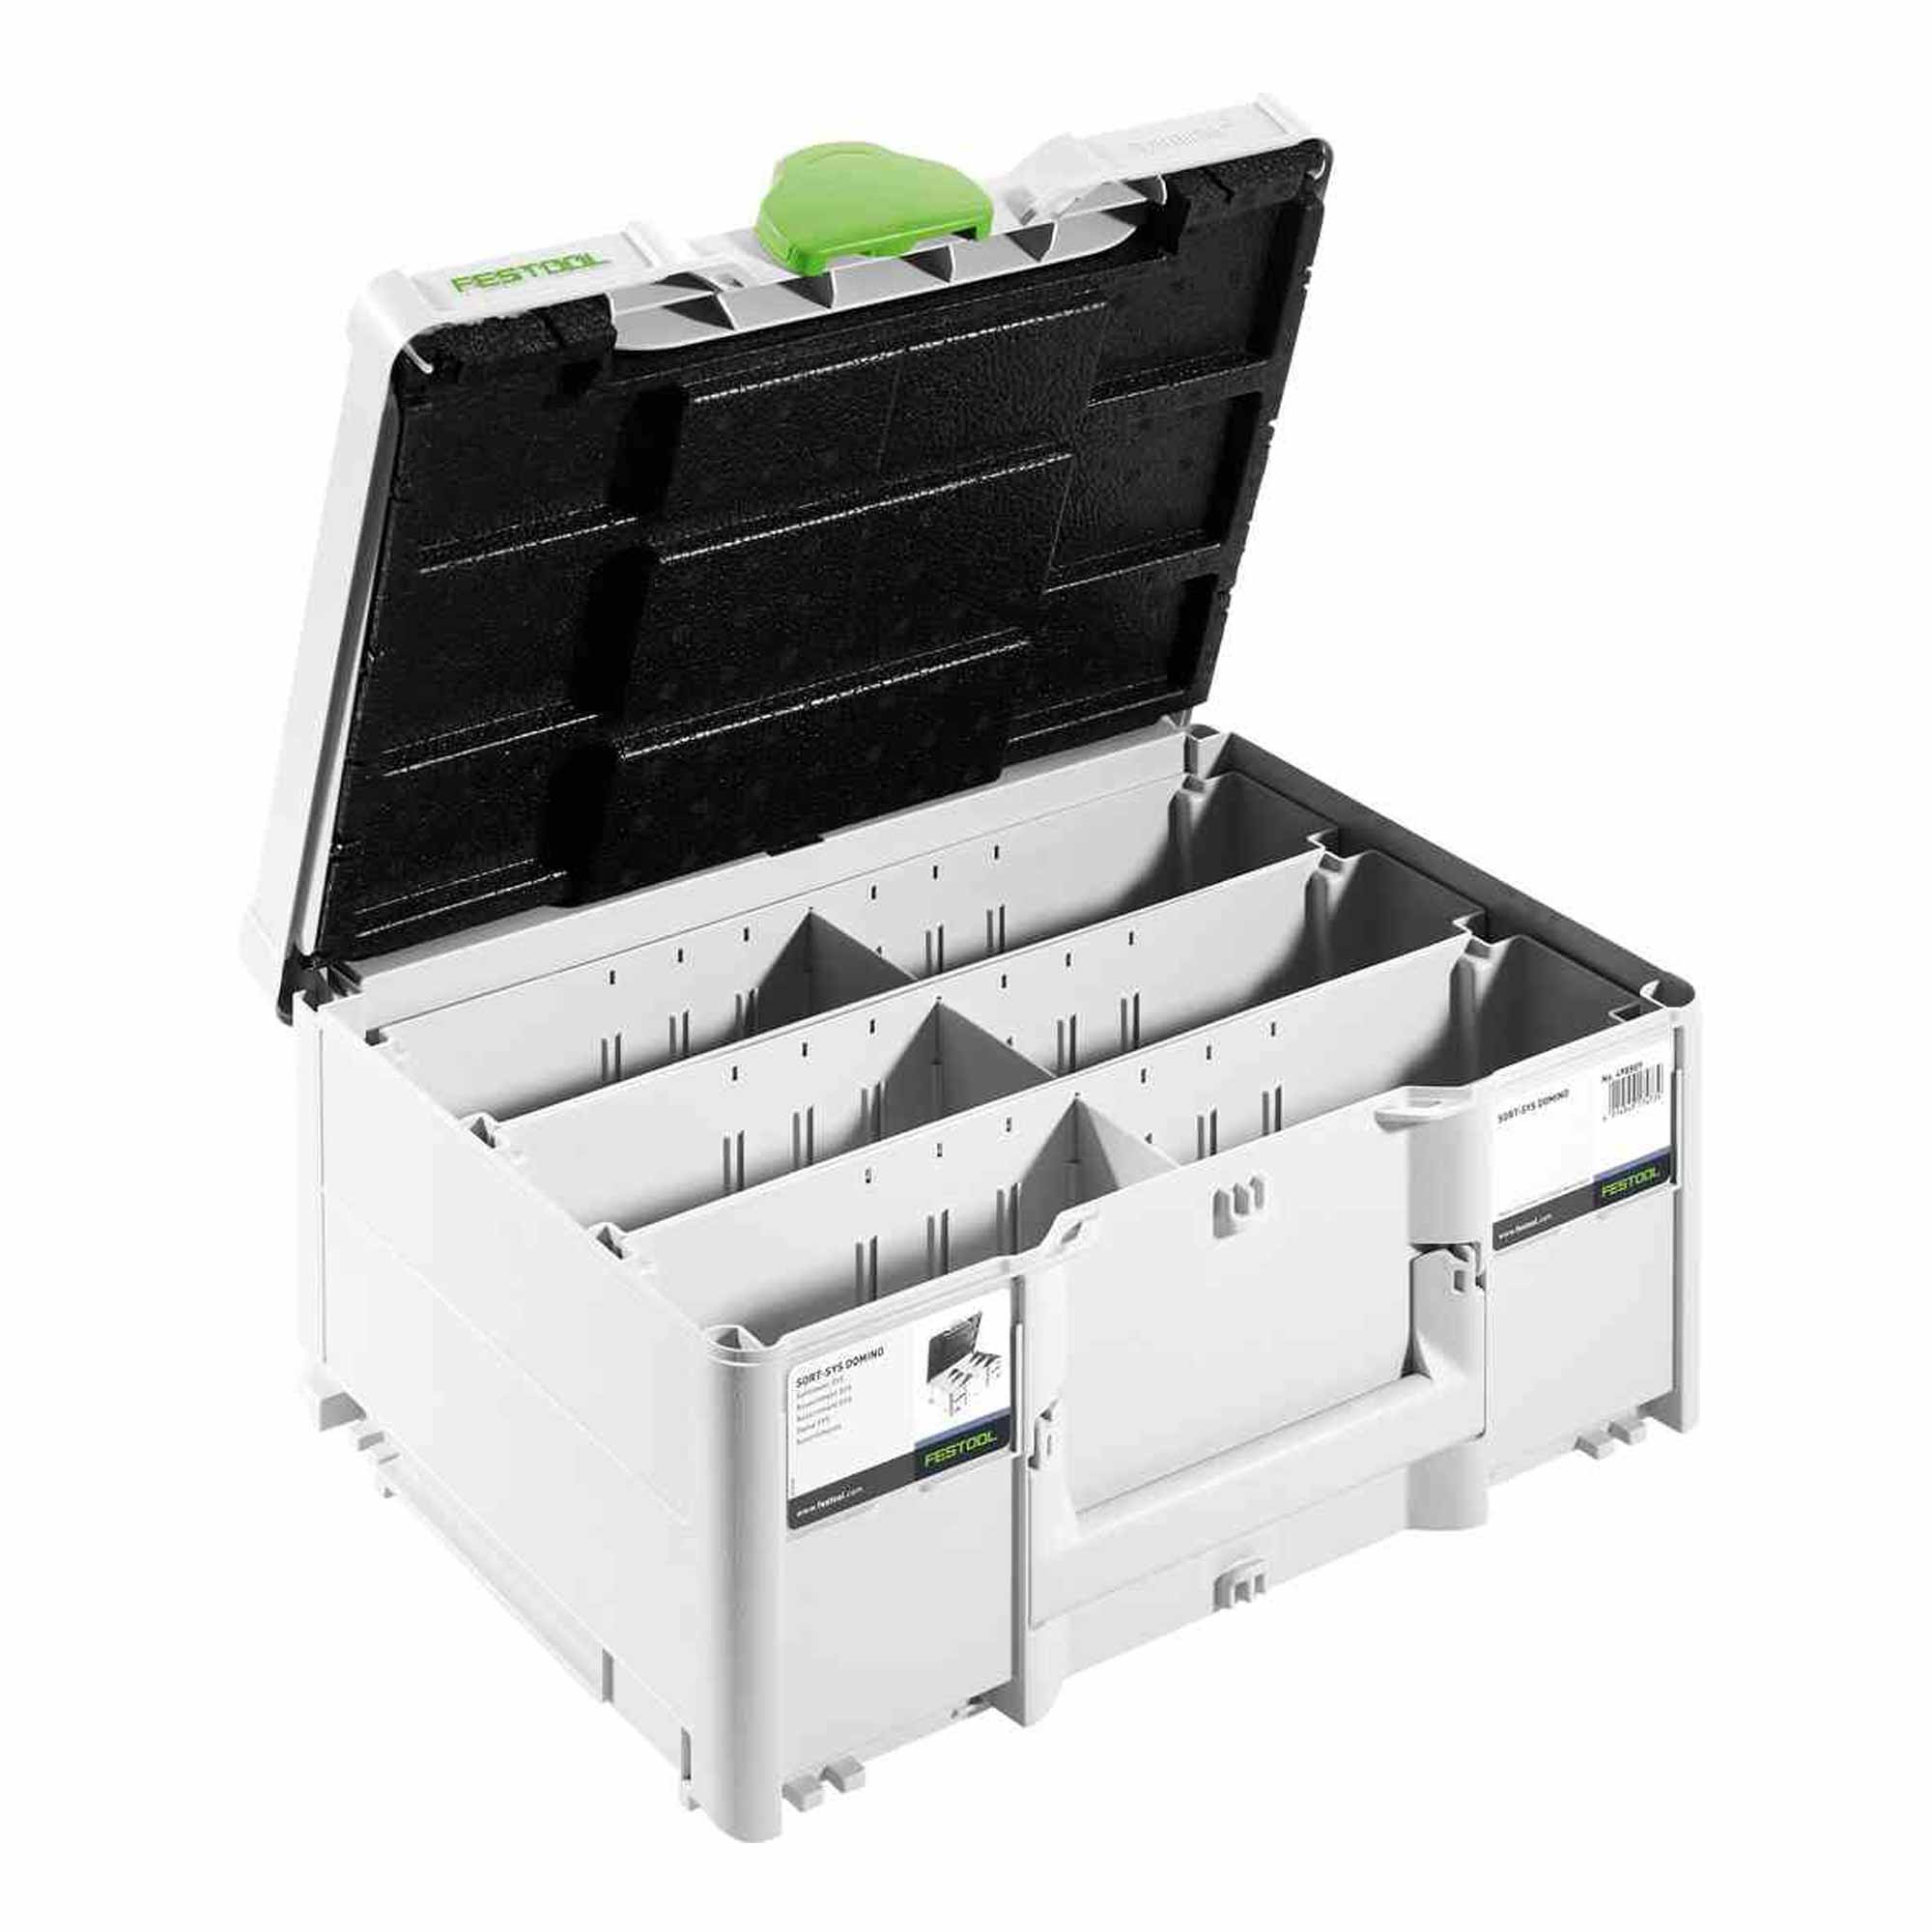 Mallette Festool Systainer³ SORT-SYS3 M 187 DOMINO